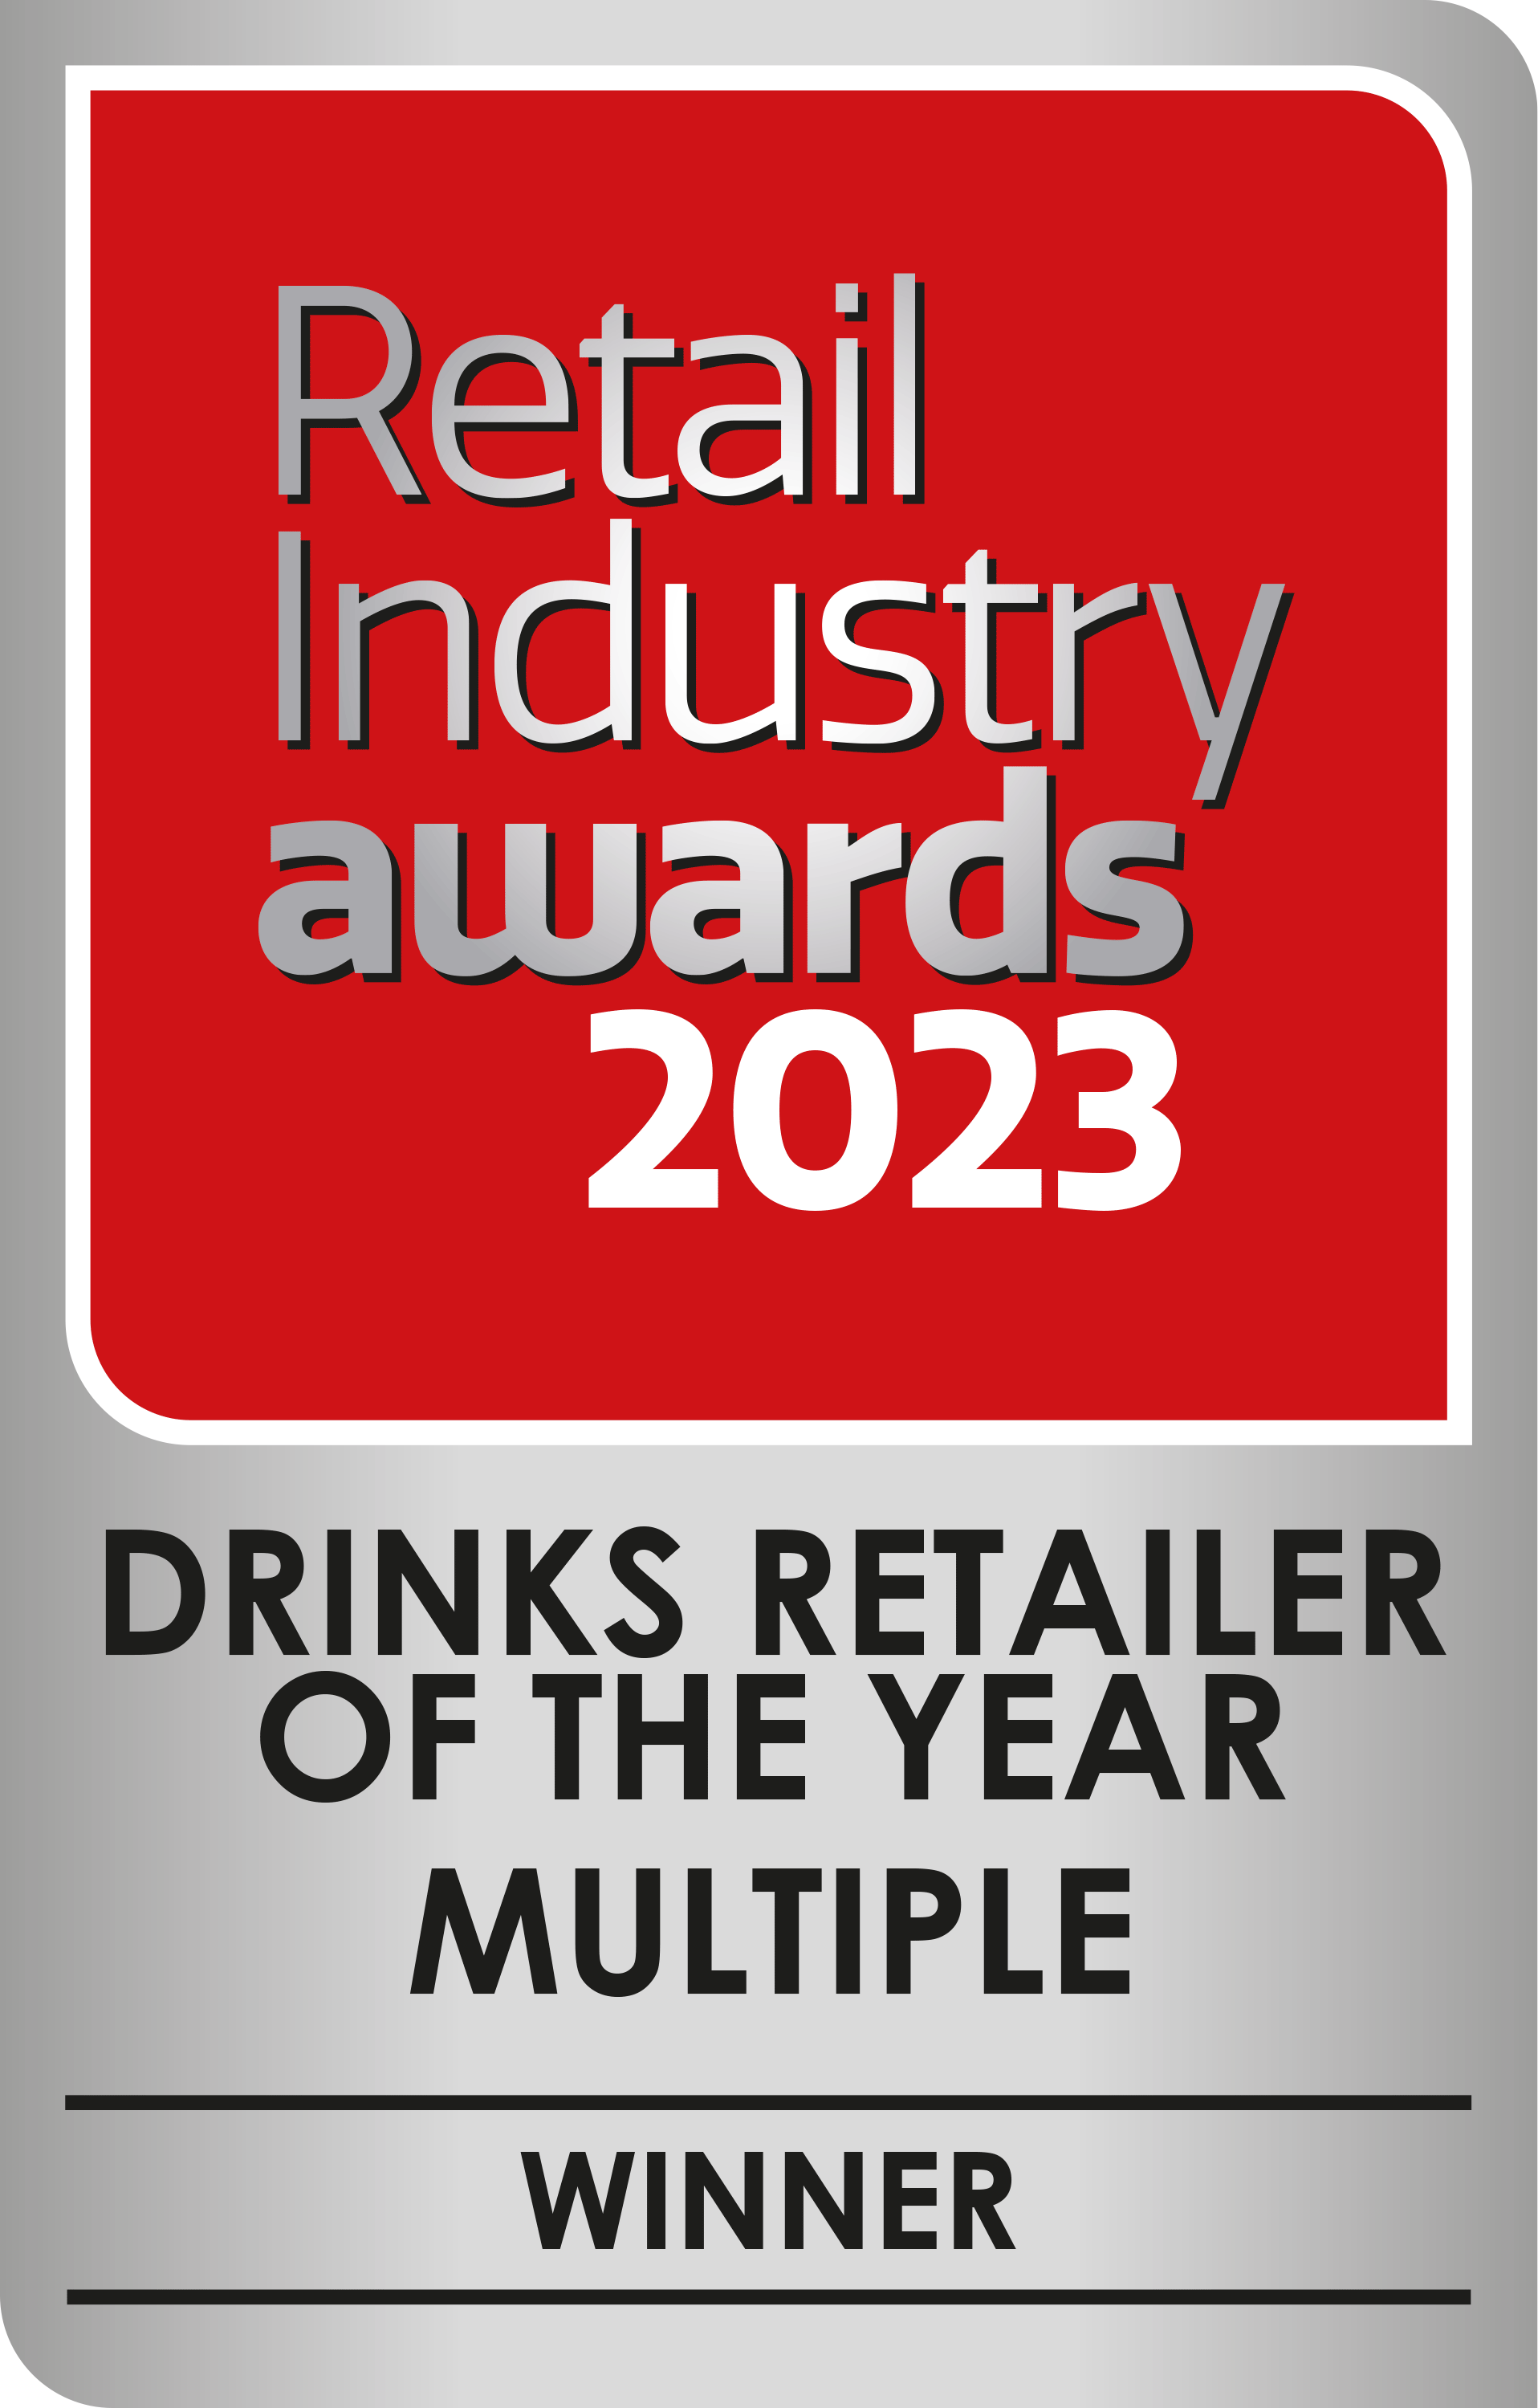 Retail Industry Awards Drinks Retailer of the Year 2023